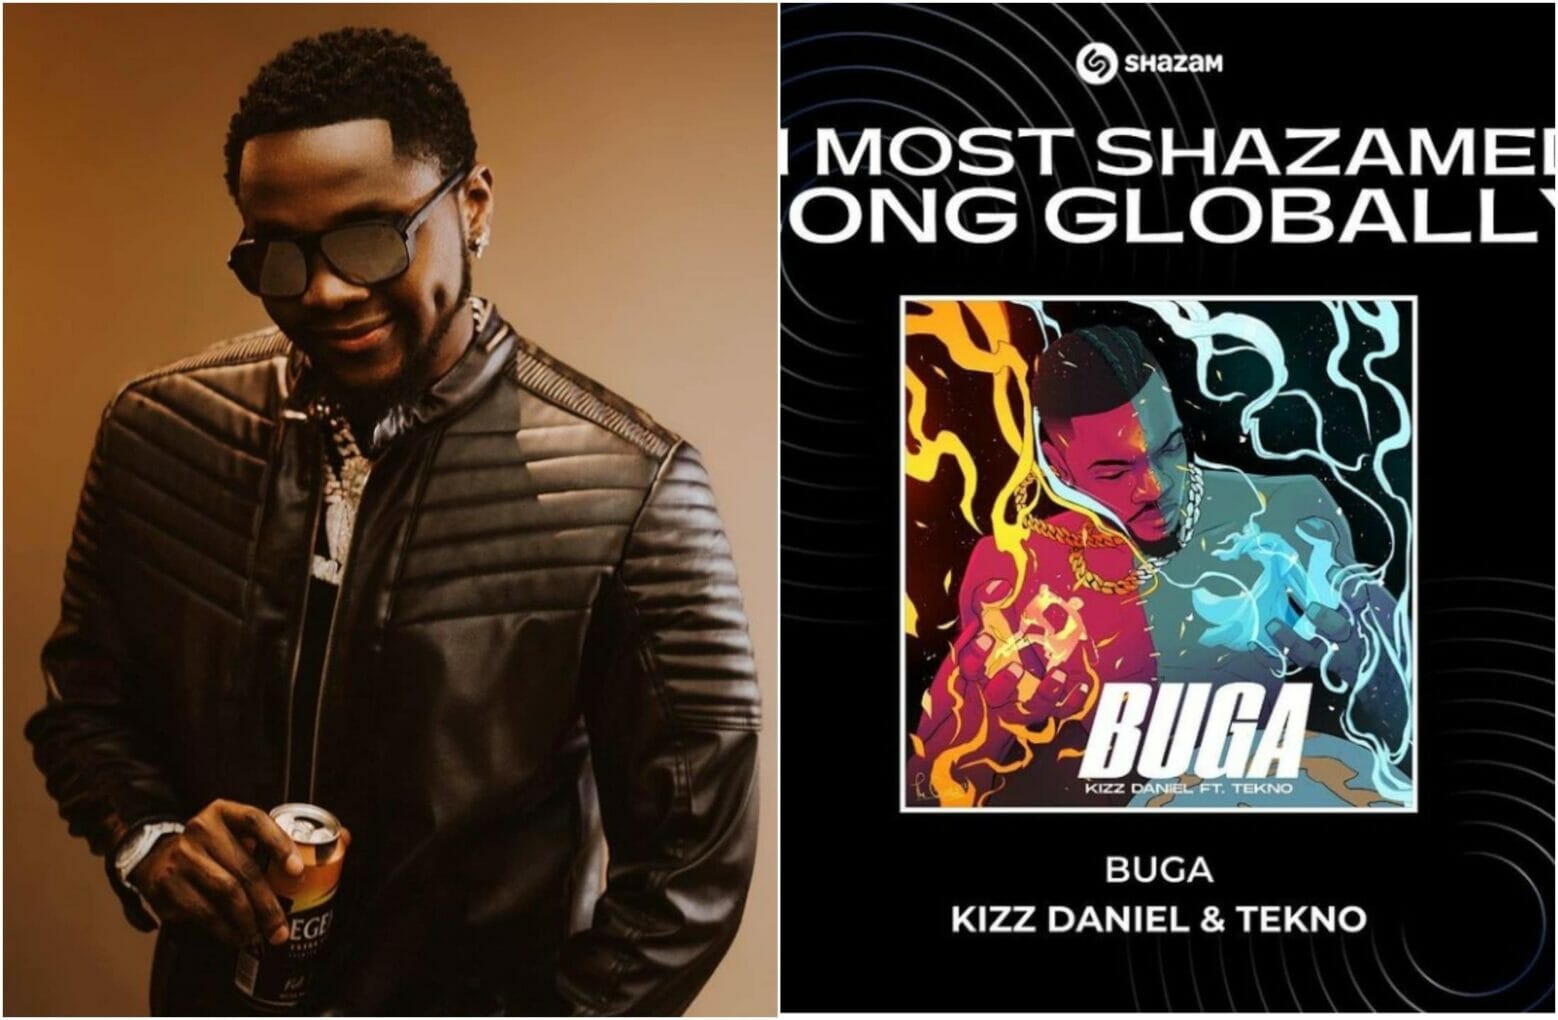 Kizz Daniel's song Buga becomes the most shazamed